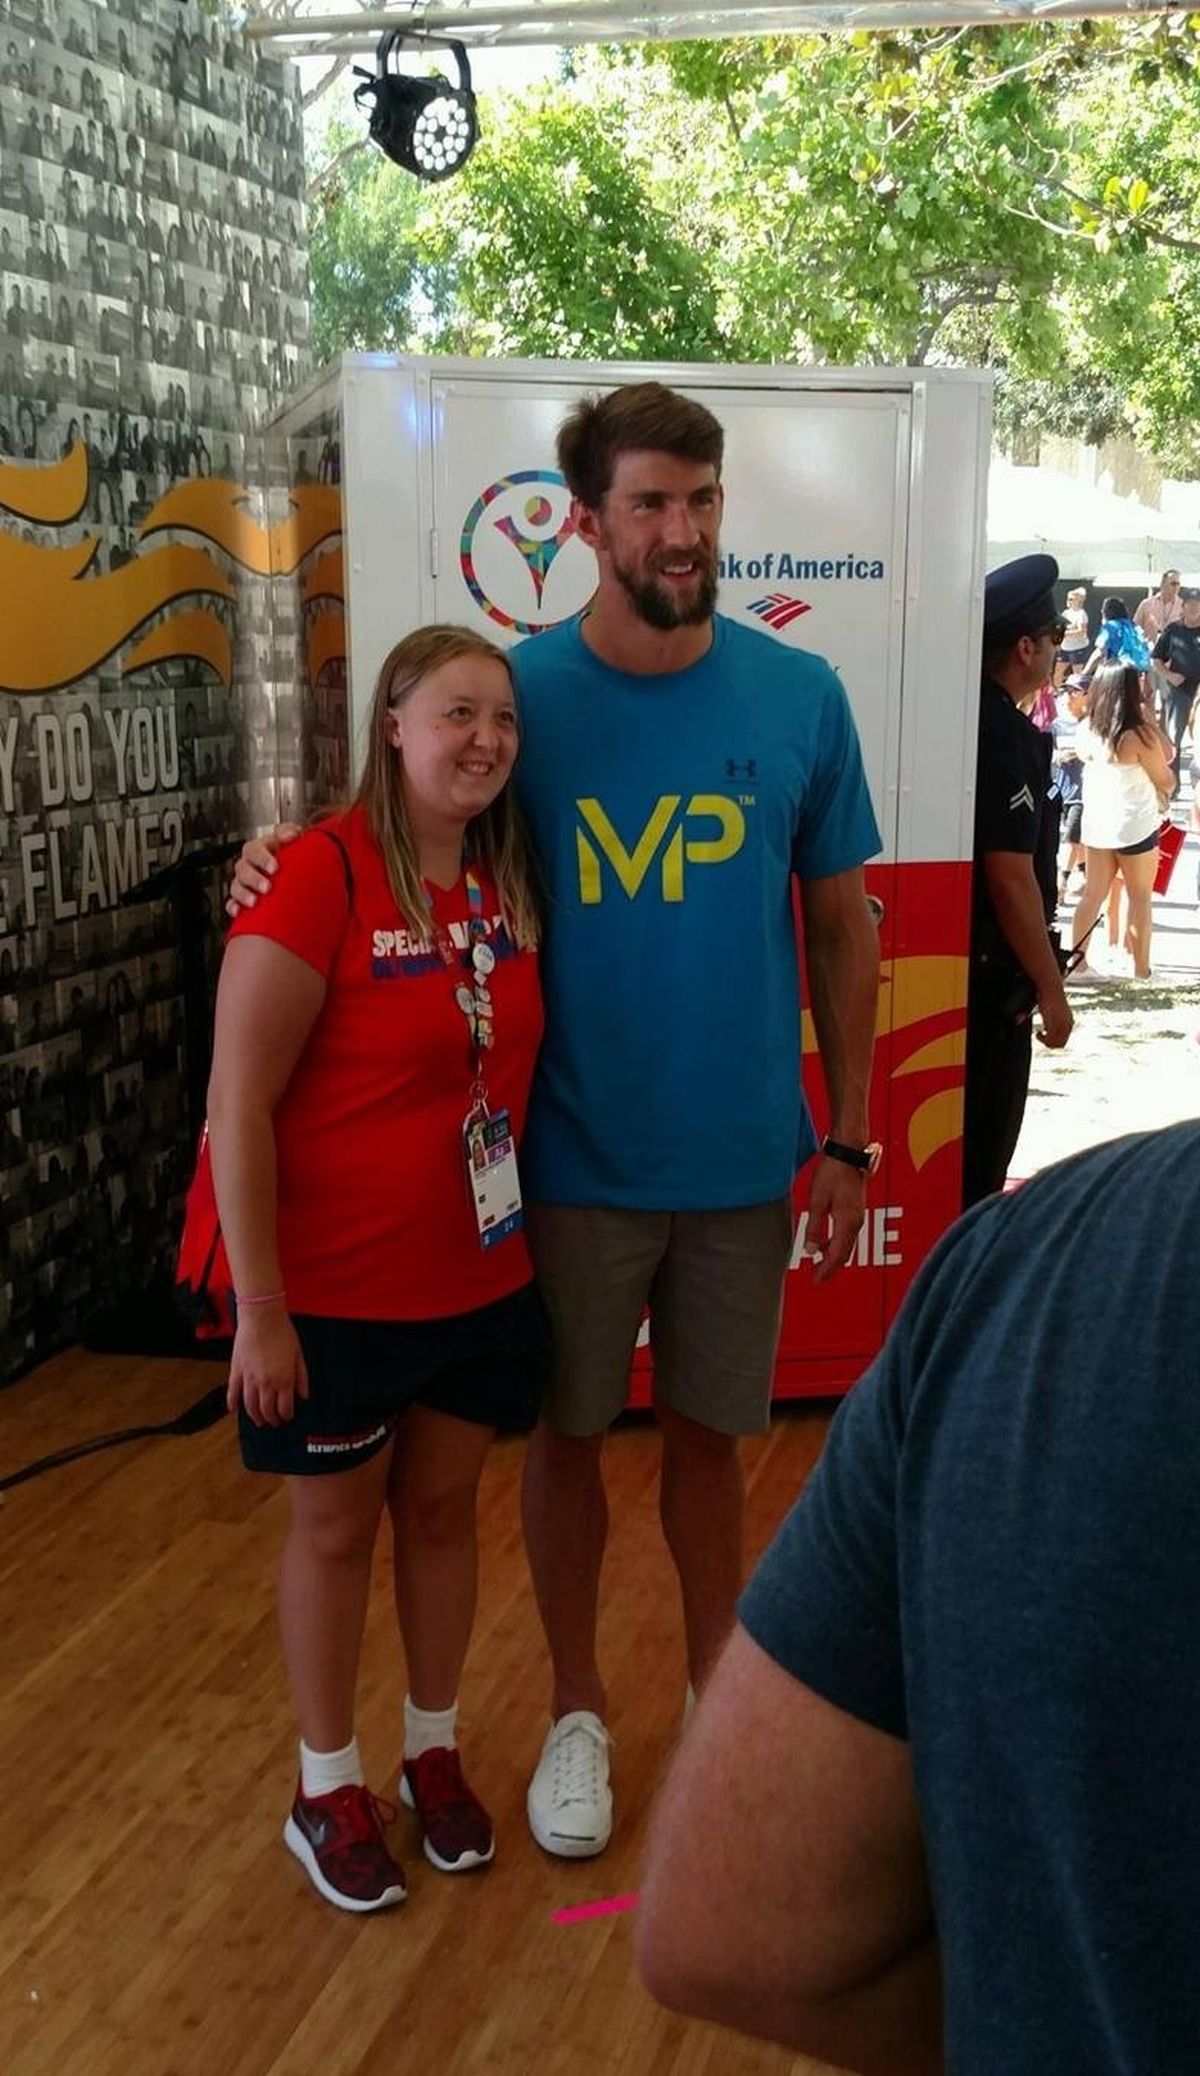 Kamilah Williamson, winner of three gold medals at the Special Olympics’ World Games in Los Angeles, poses with U.S. Olympic swim multigold medalist Michael Phelps.